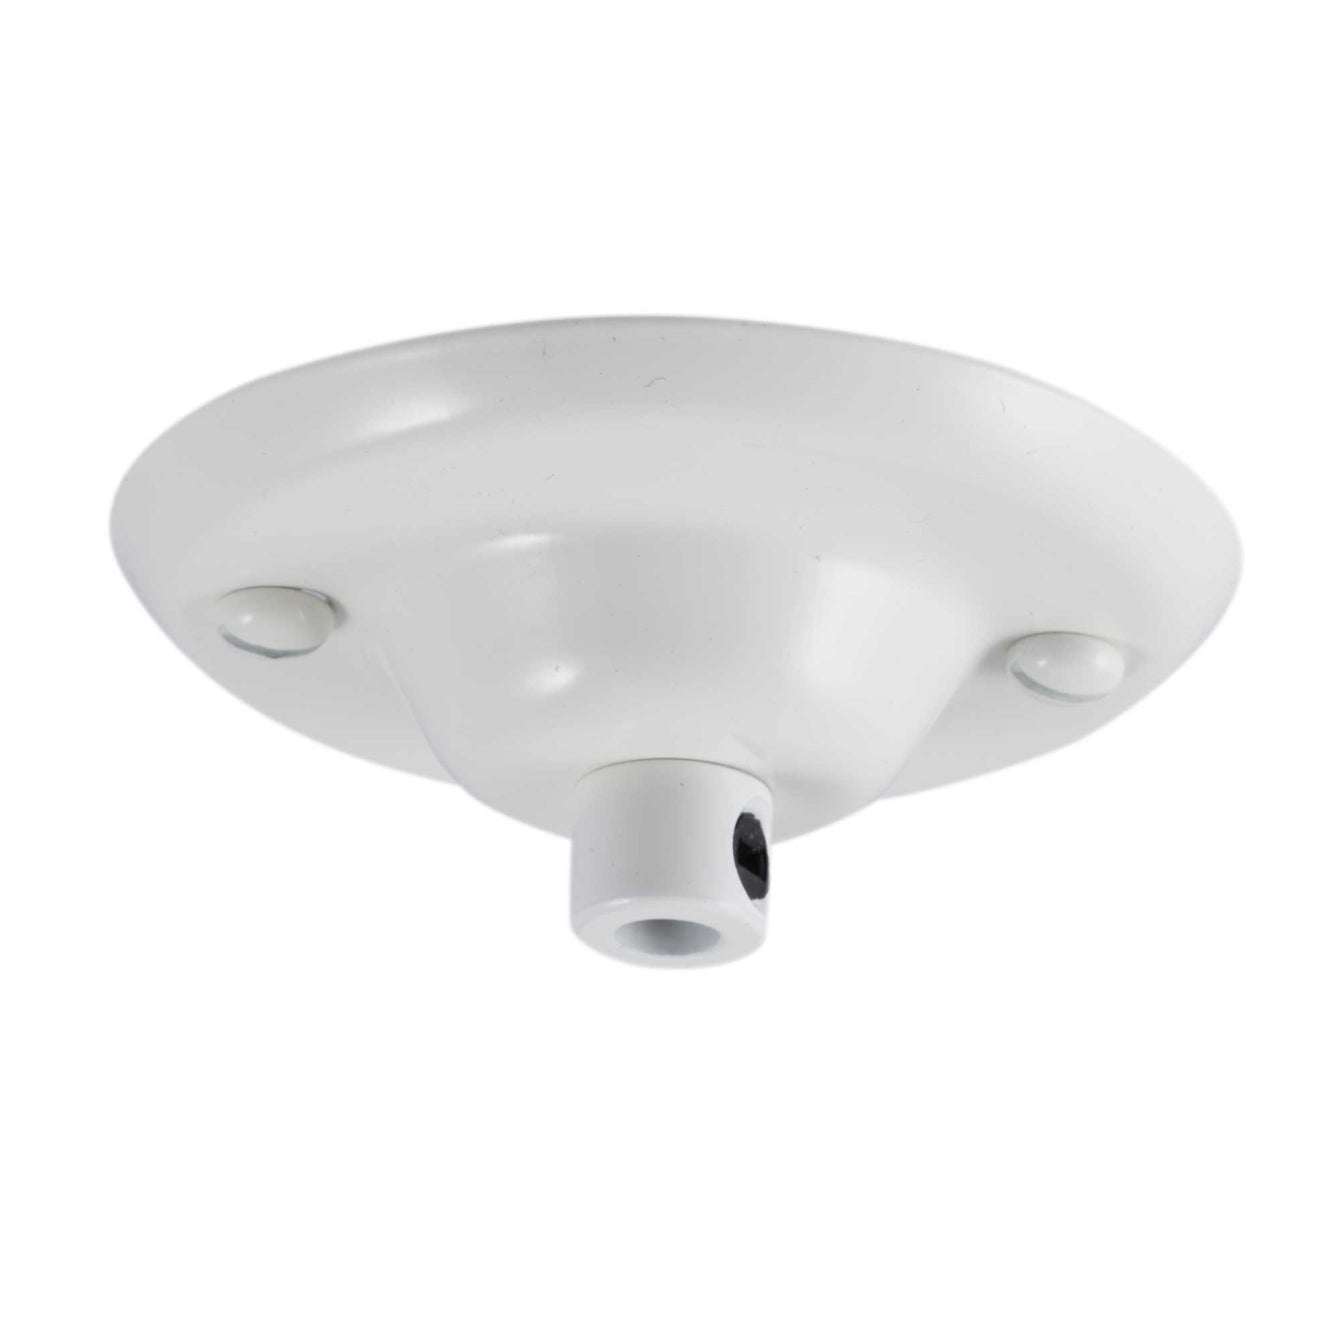 ElekTek 75mm Diameter Ceiling Plate with Cord Grip Metallic Finishes Powder Coated Colours 